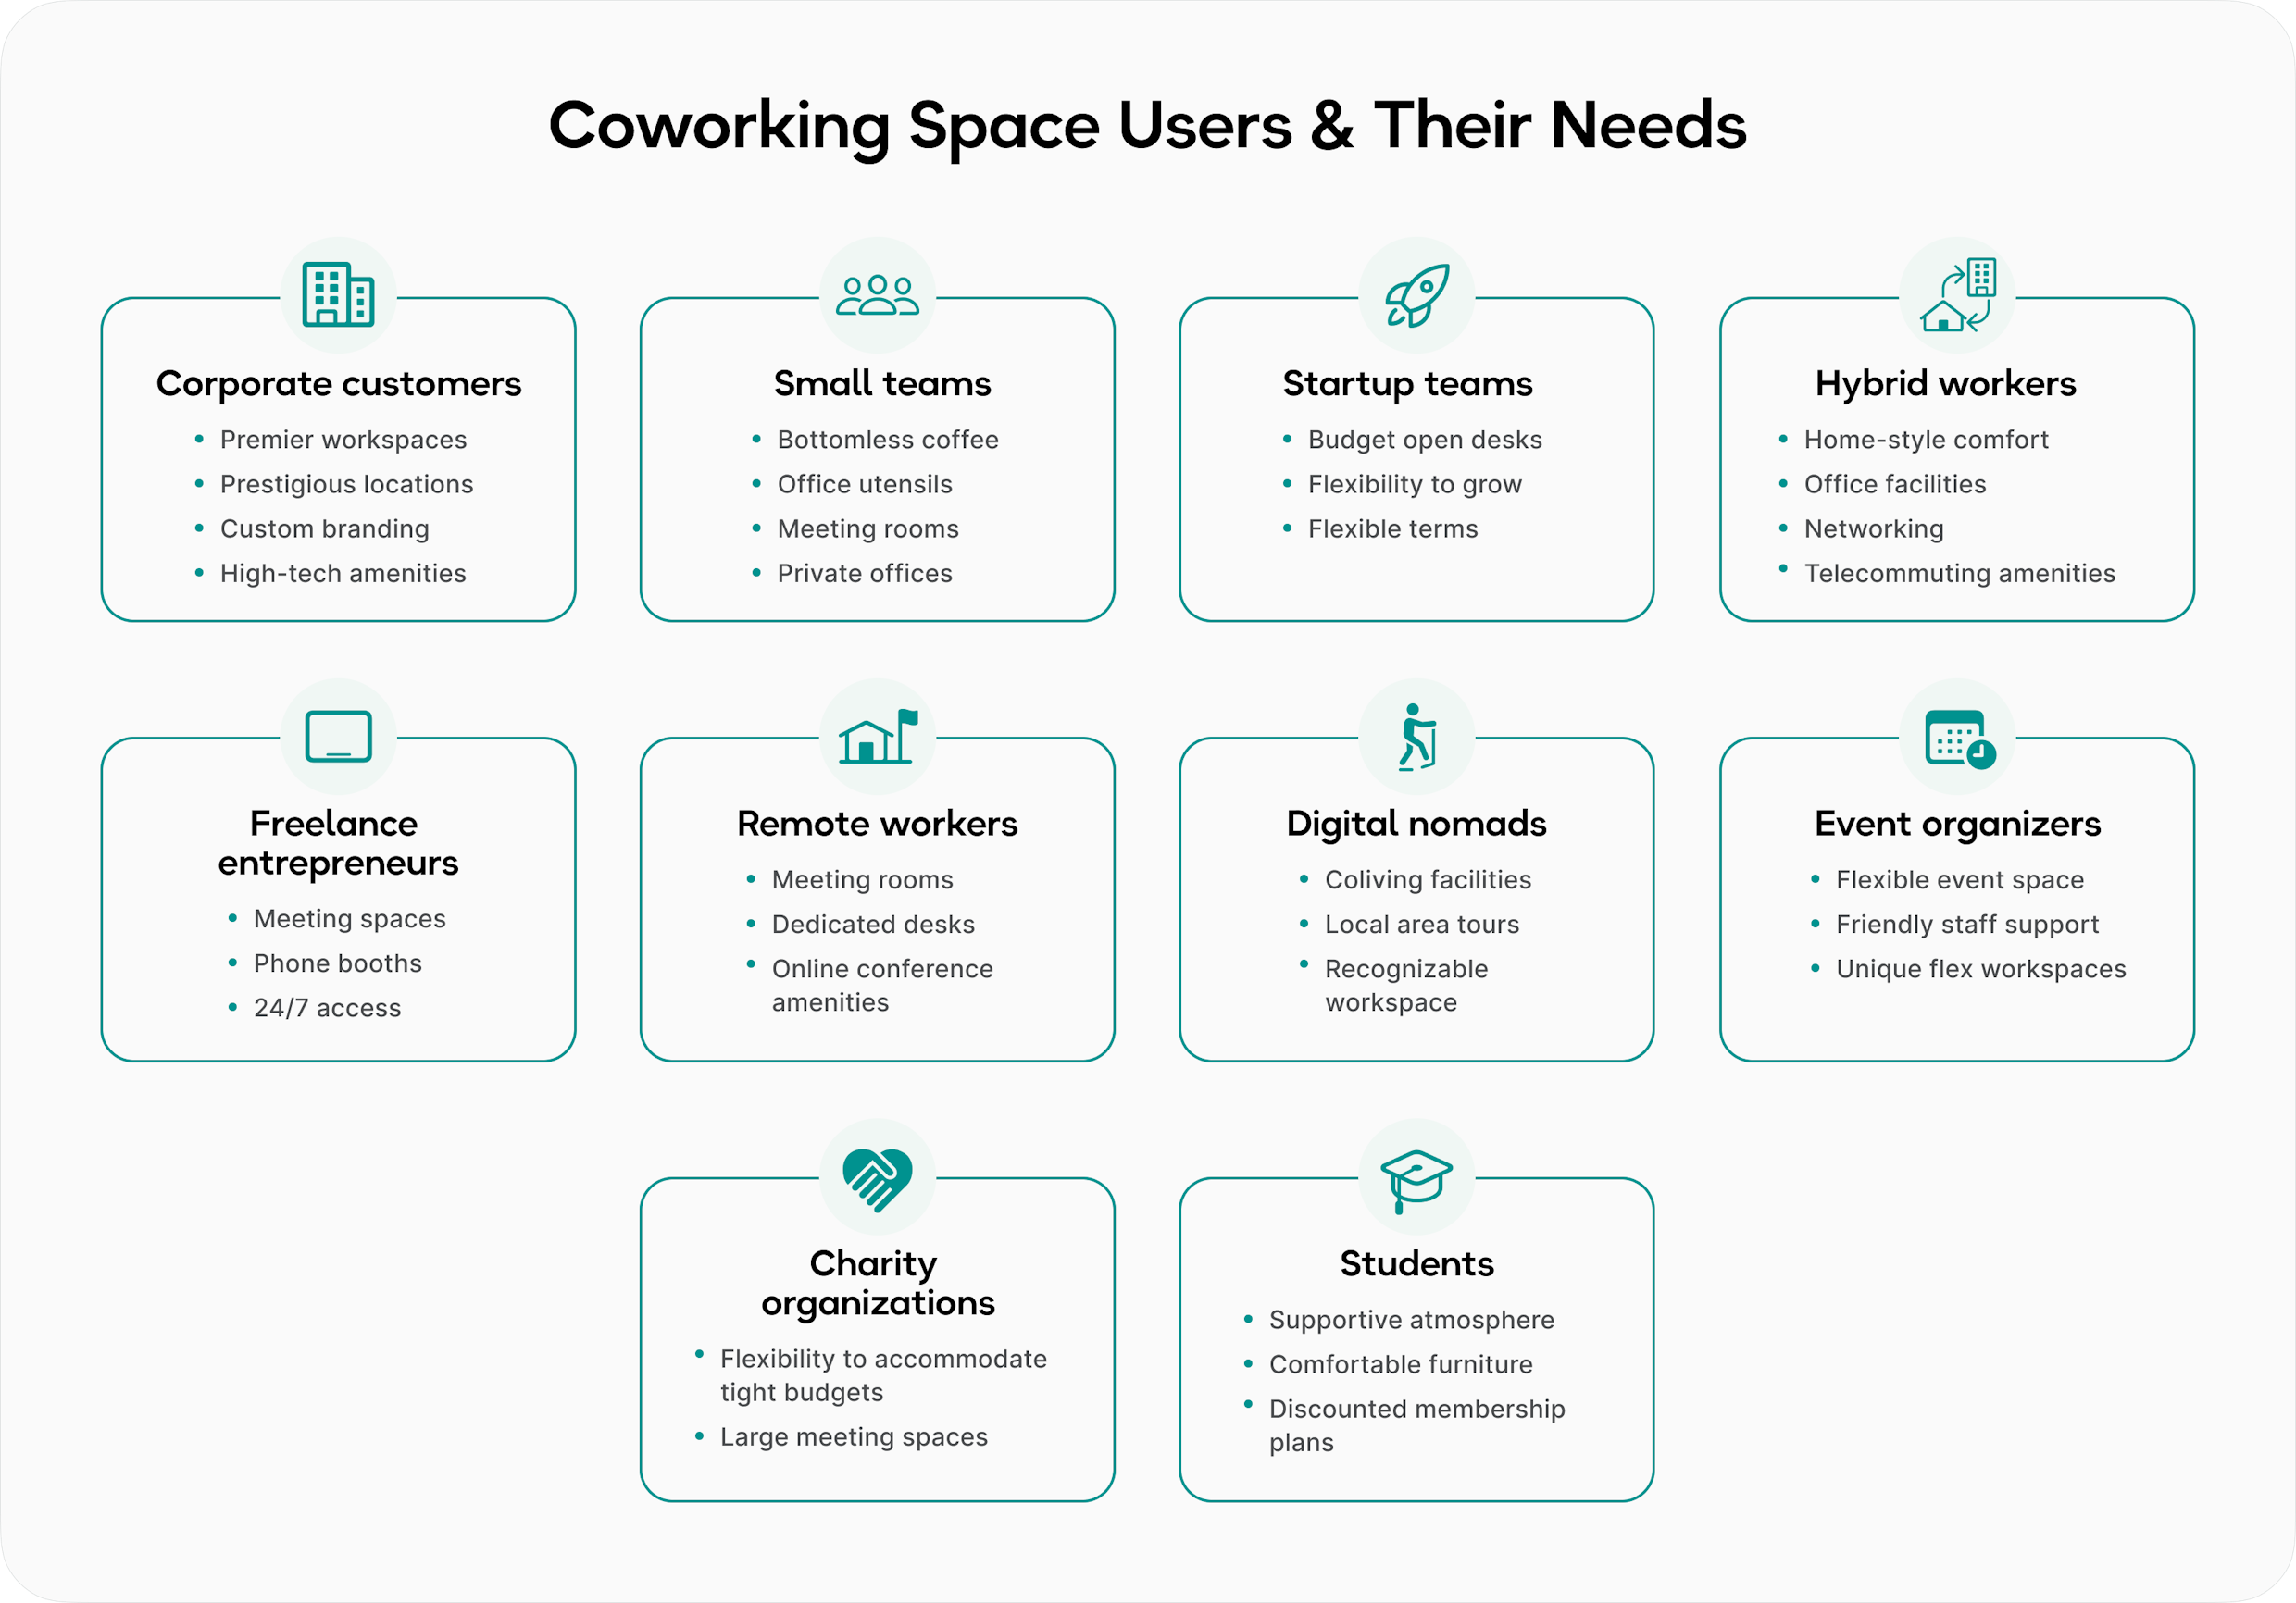 Types of coworking space users and their unique needs 